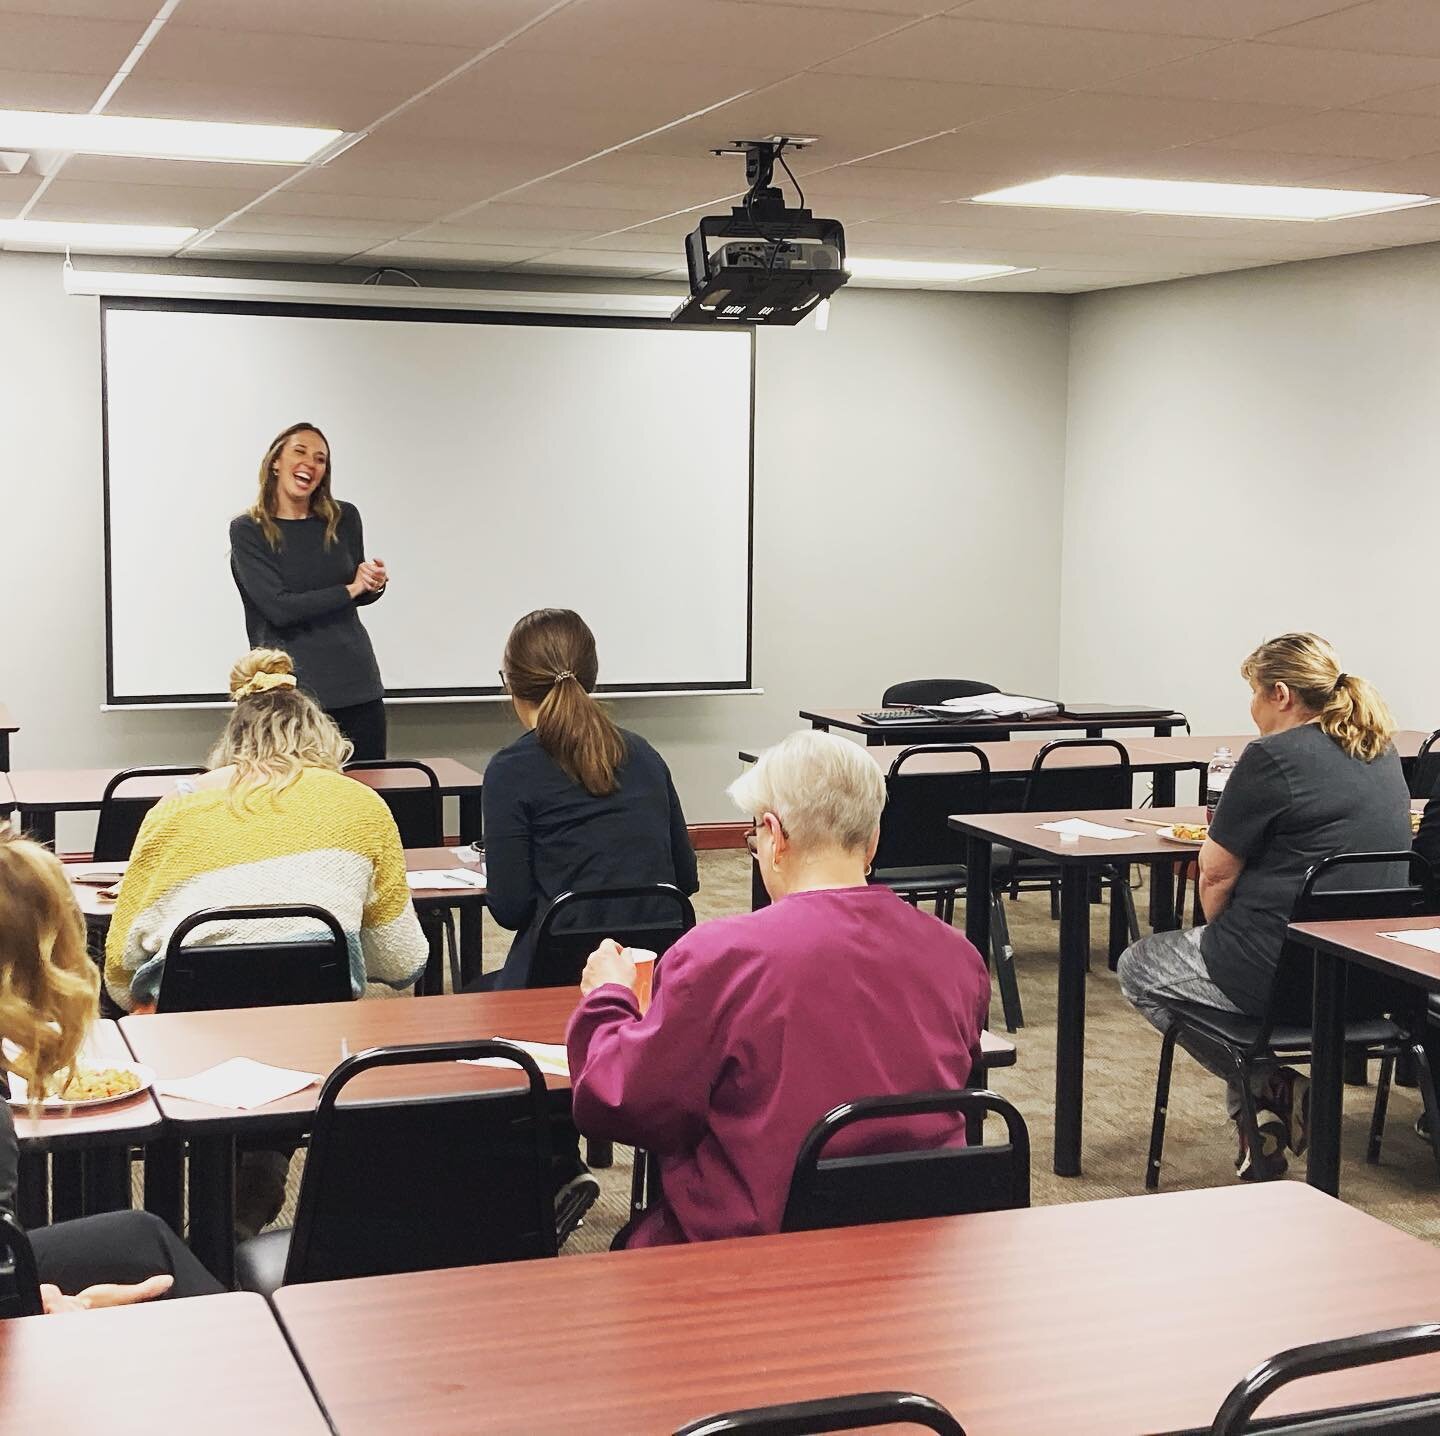 Thank you Embrace Dentistry for welcoming us into your office for a lunch and learn. Dr. Bethany loved sharing the message of neurologically-based chiropractic!

If your team is interested in a lunch &amp; learn and learning more about chiropractic r